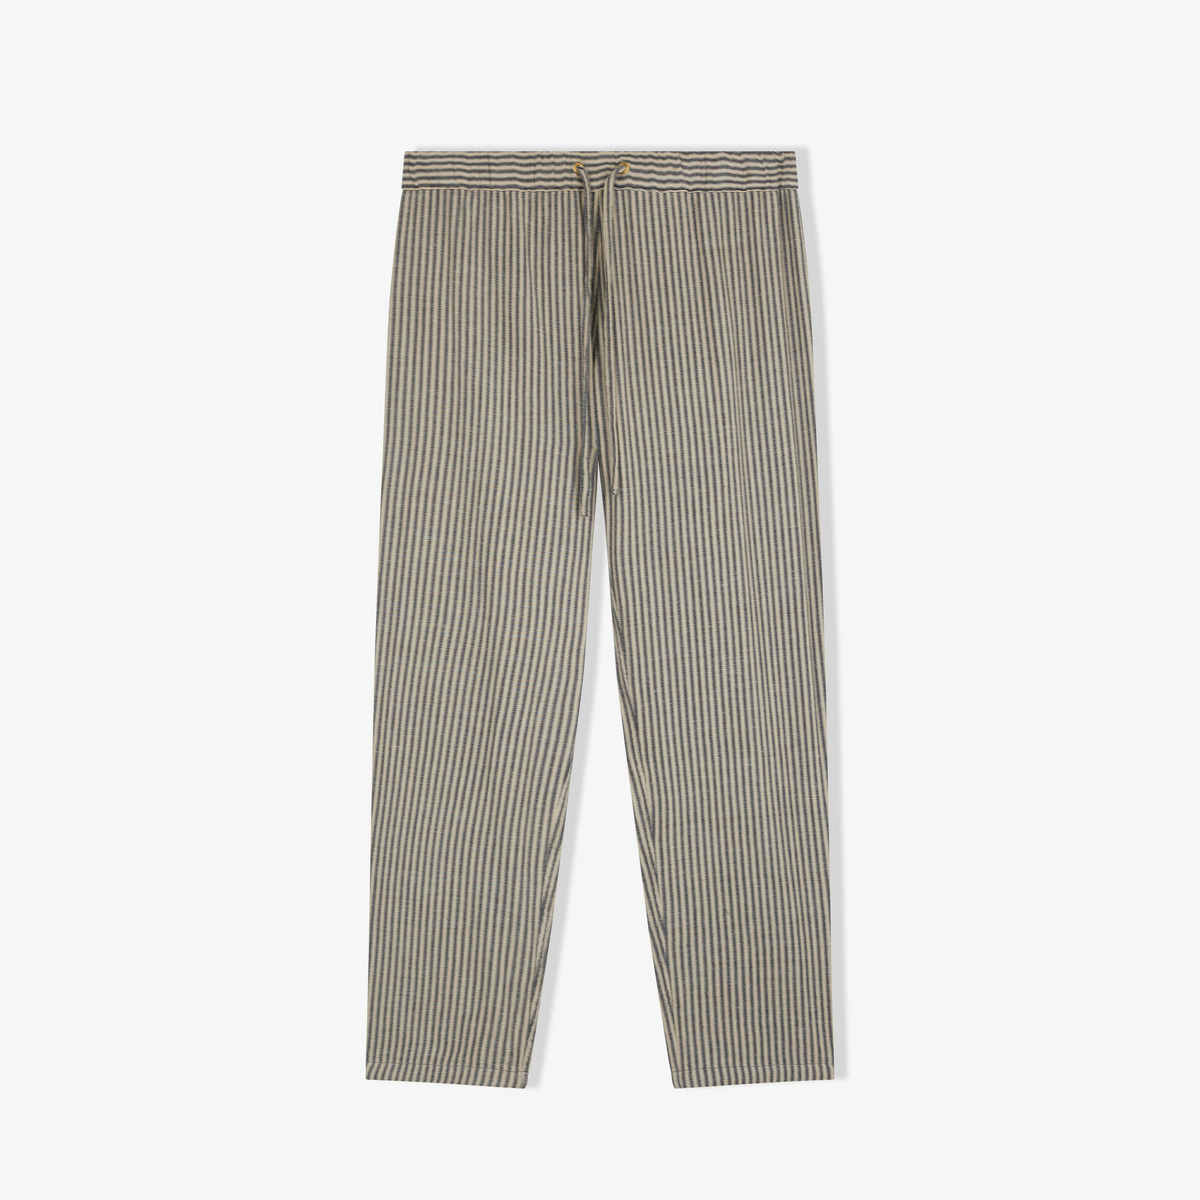 Sibelle Reversible Trousers, Black and white - 100% cotton - image 3